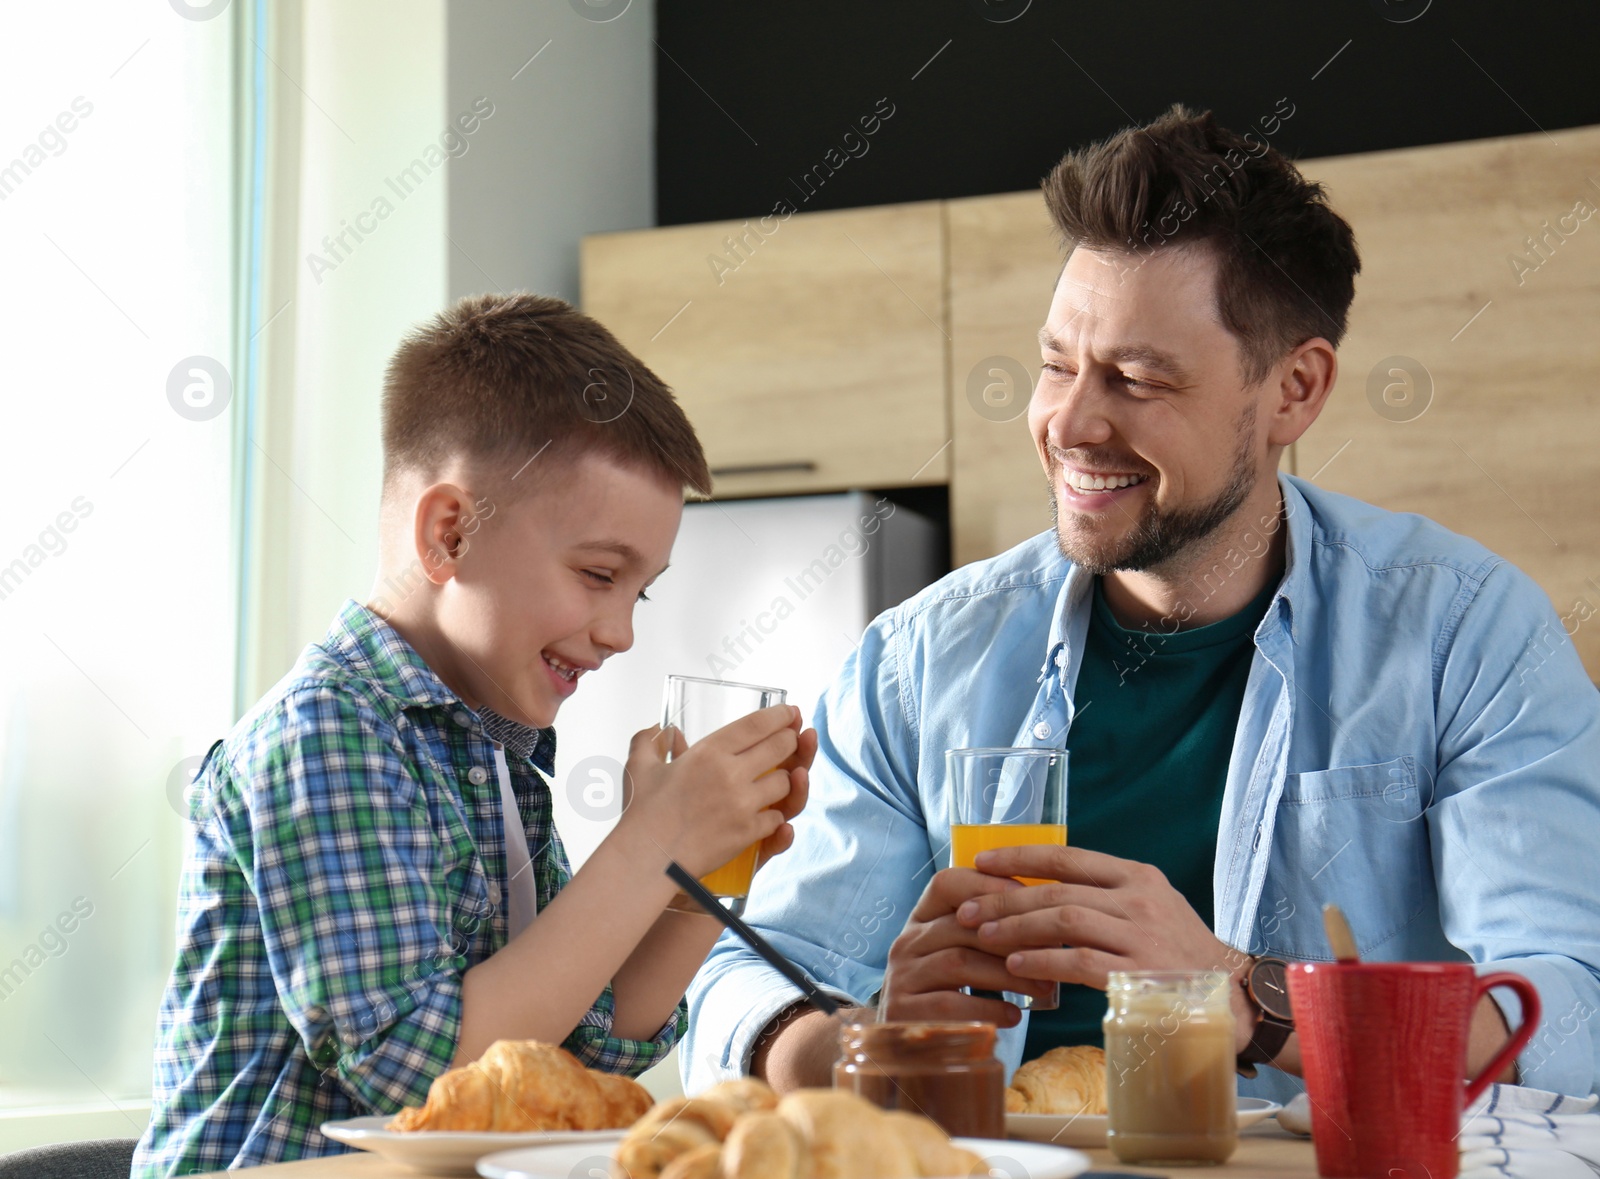 Photo of Dad and son having breakfast together in kitchen